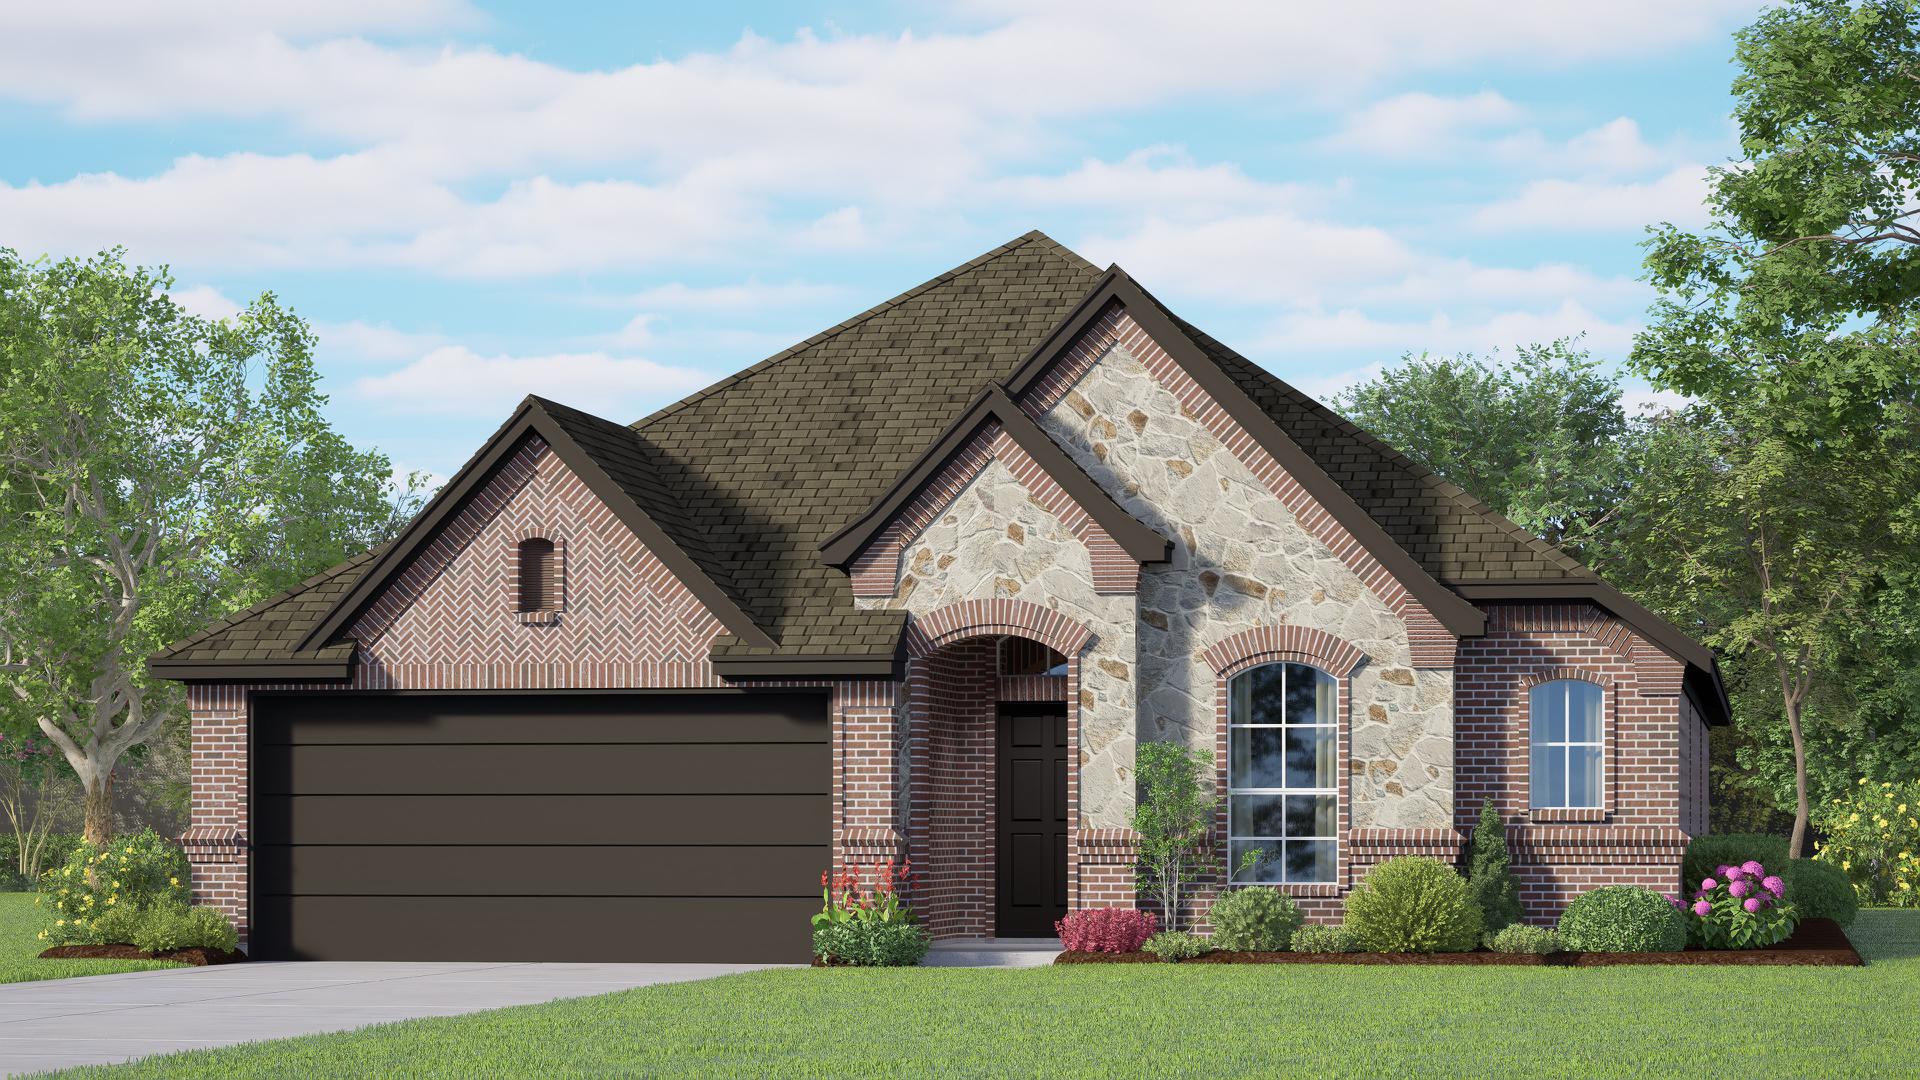 1730 D With Stone. Concept 1730 New Home Floor Plan